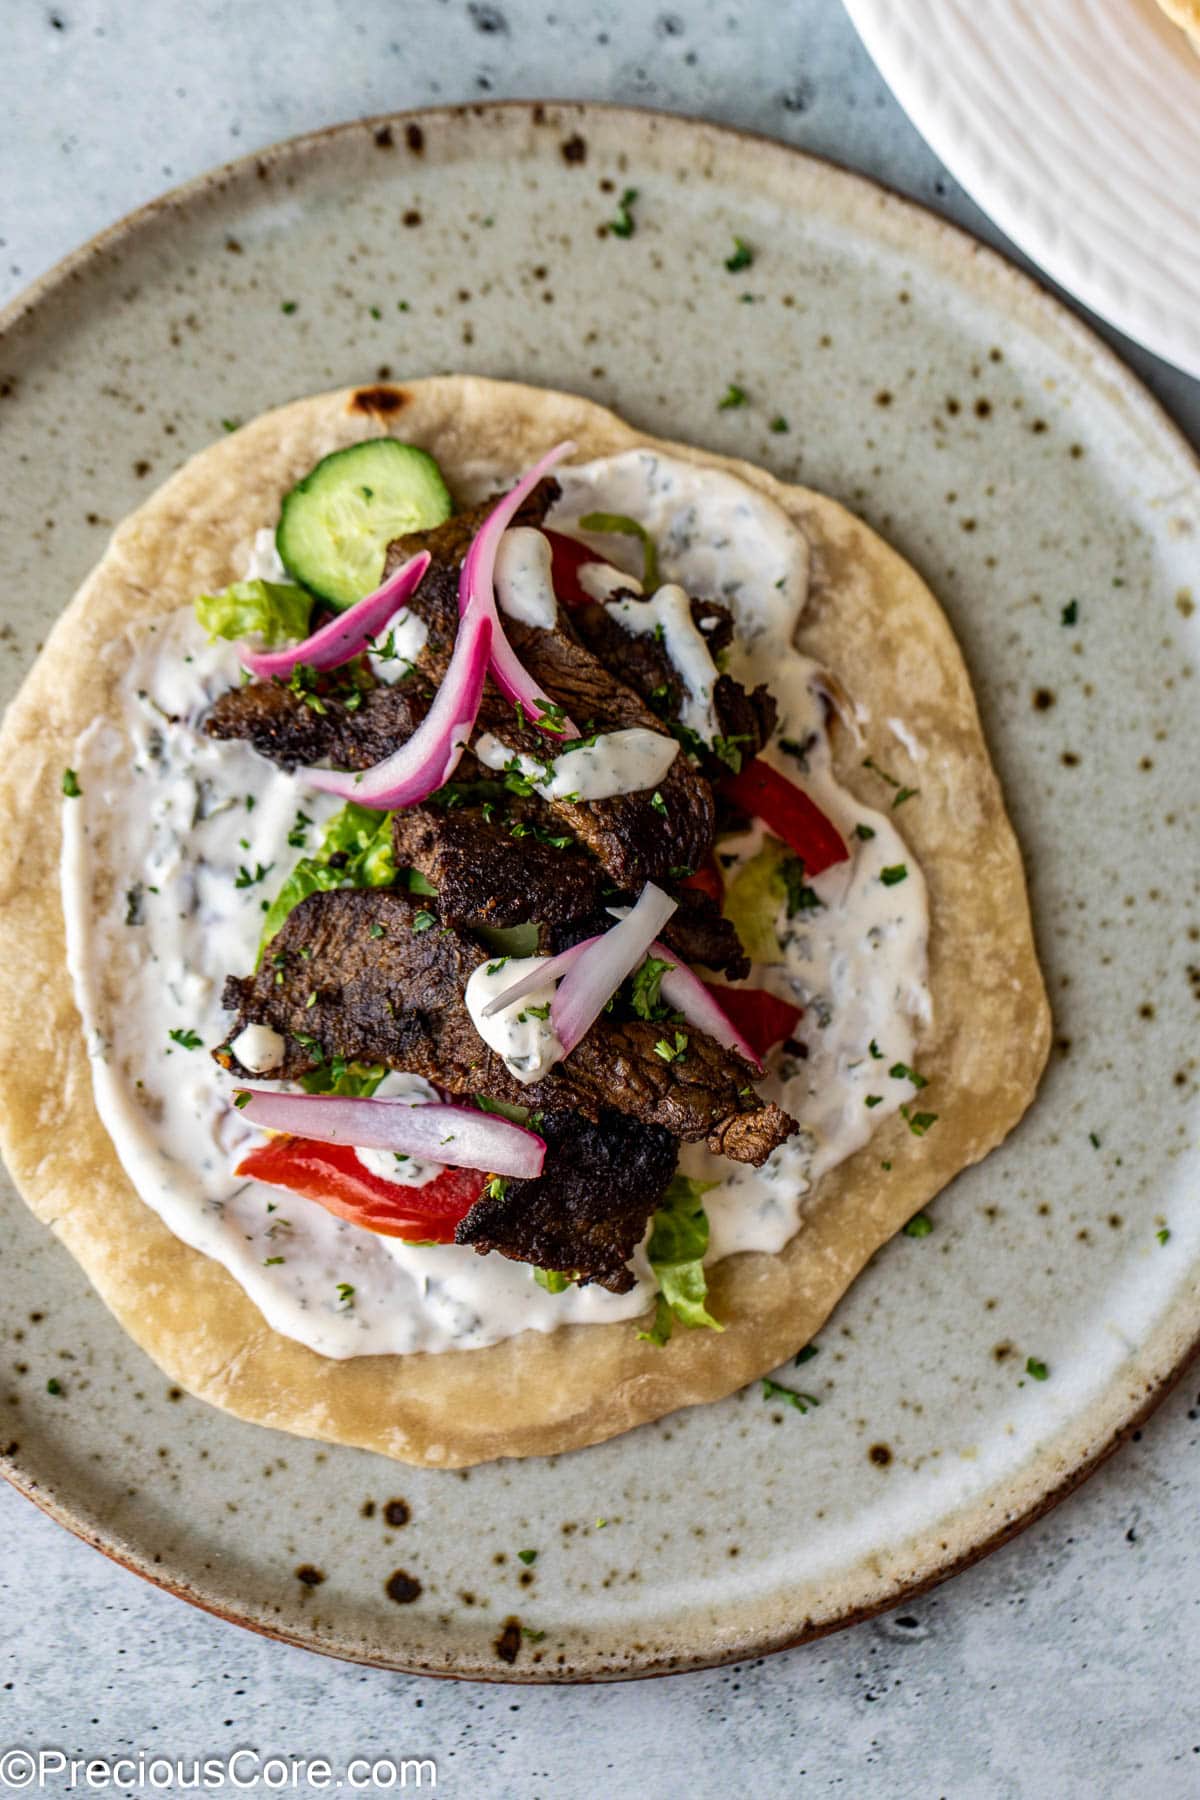 A flatbread topped with beef shawarma, veggies, and sauce.